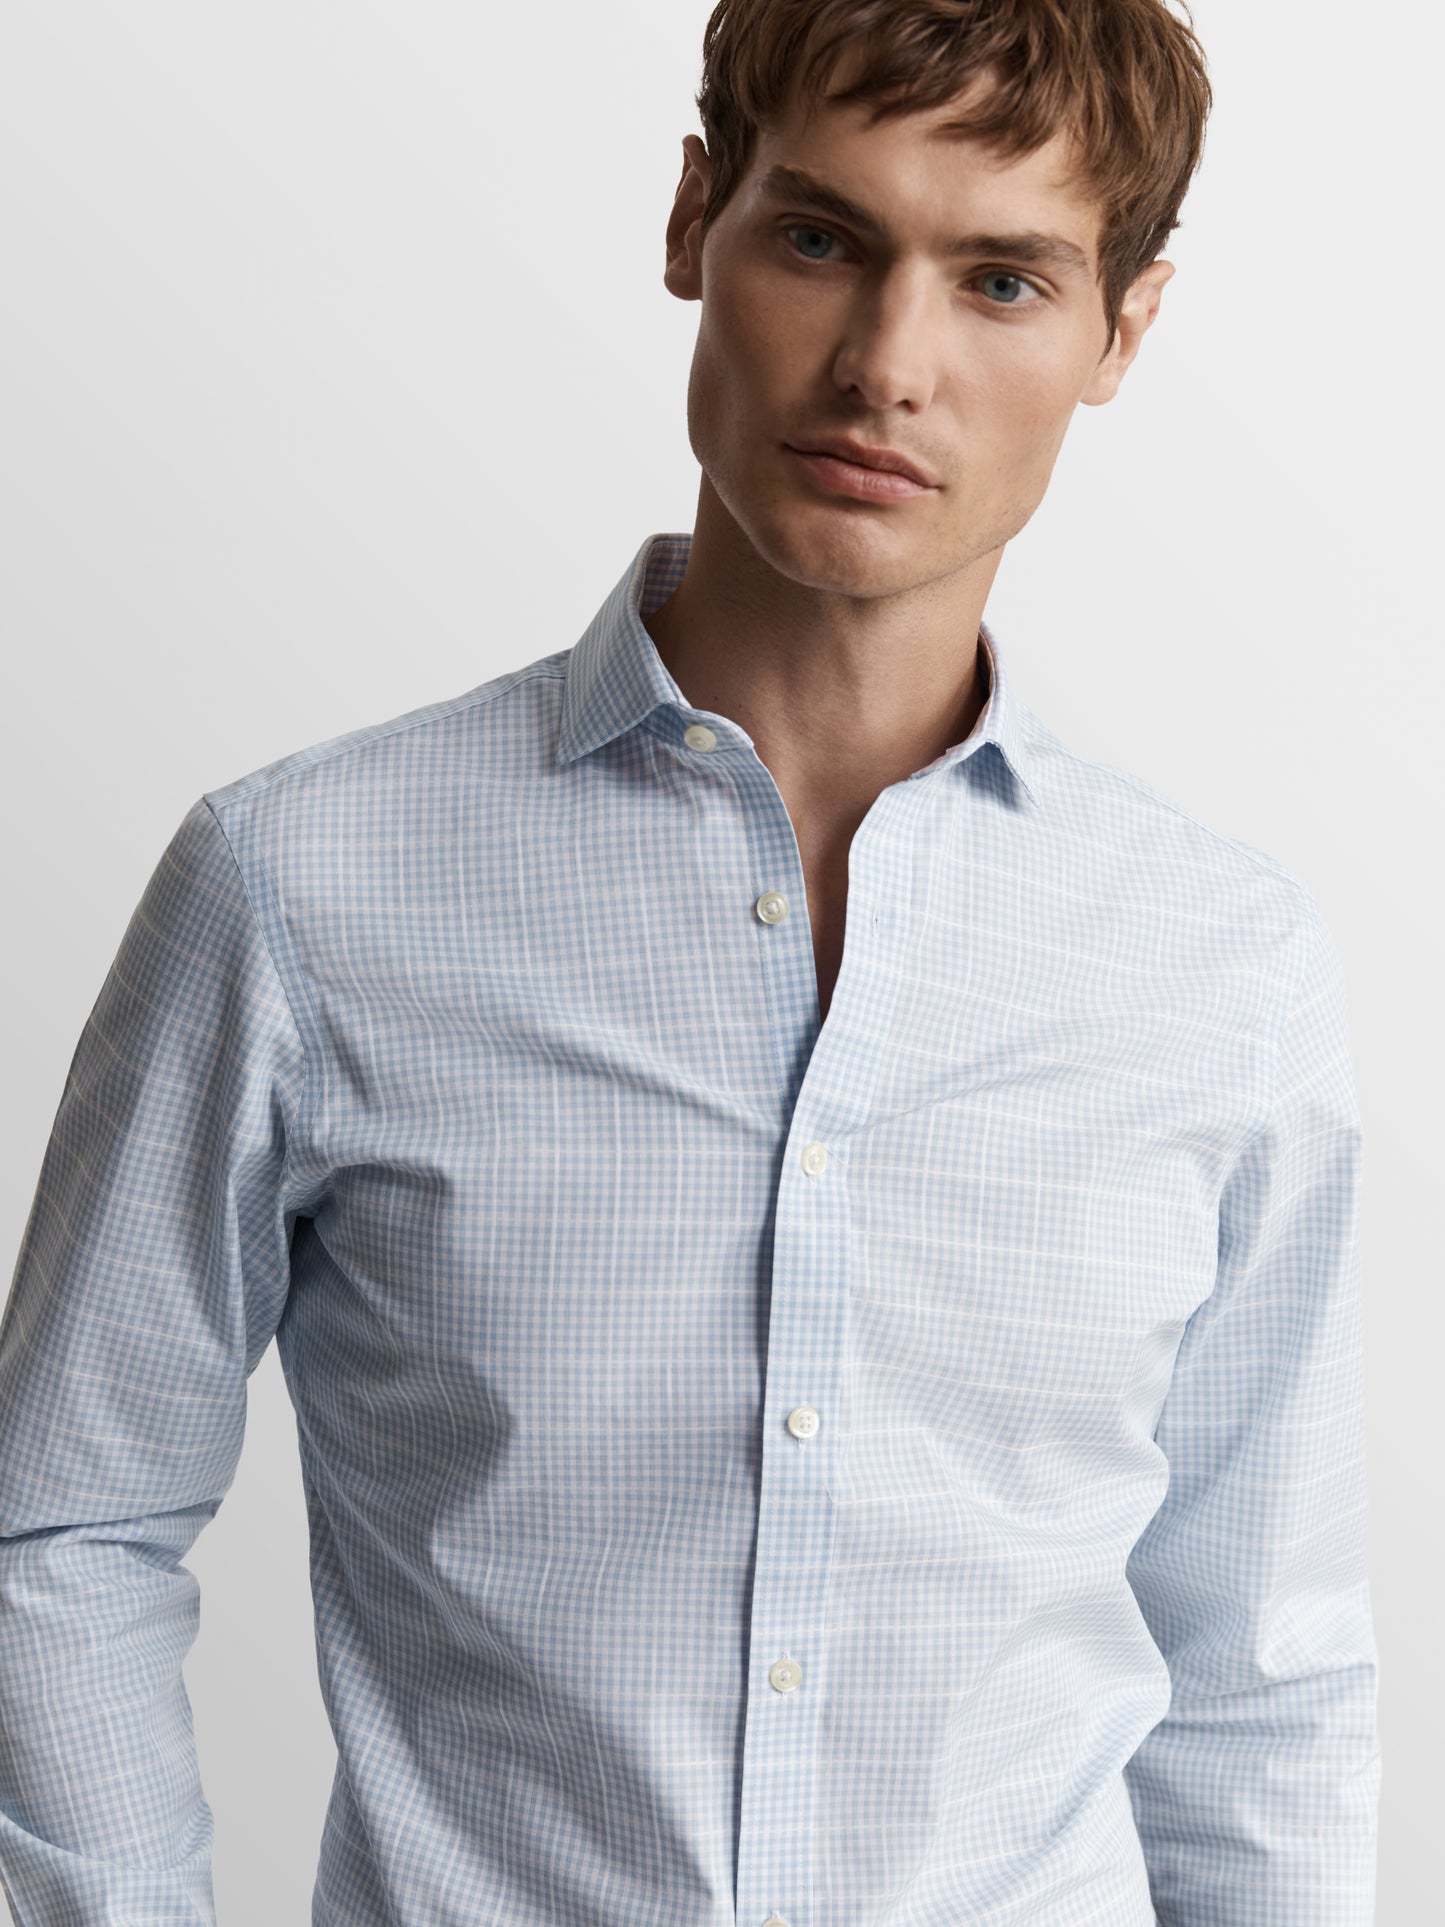 Image 1 of Non-Iron Blue Grid Gingham Plain Weave Fitted Single Cuff Semi Cutaway Collar Shirt